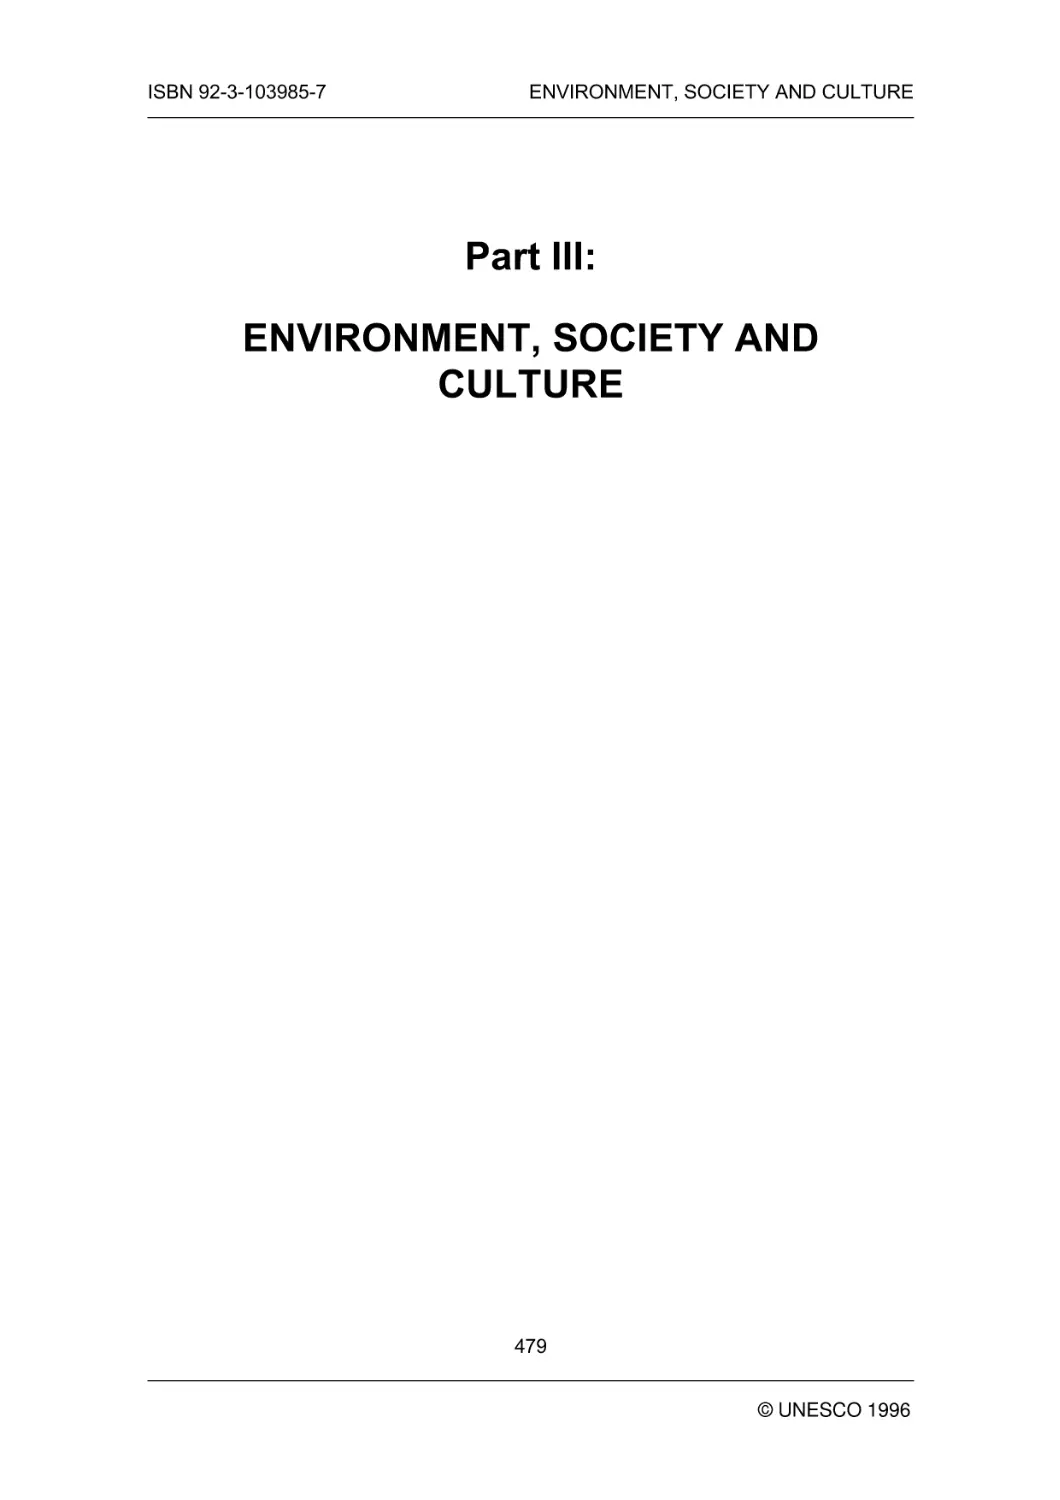 ENVIRONMENT, SOCIETY AND CULTURE